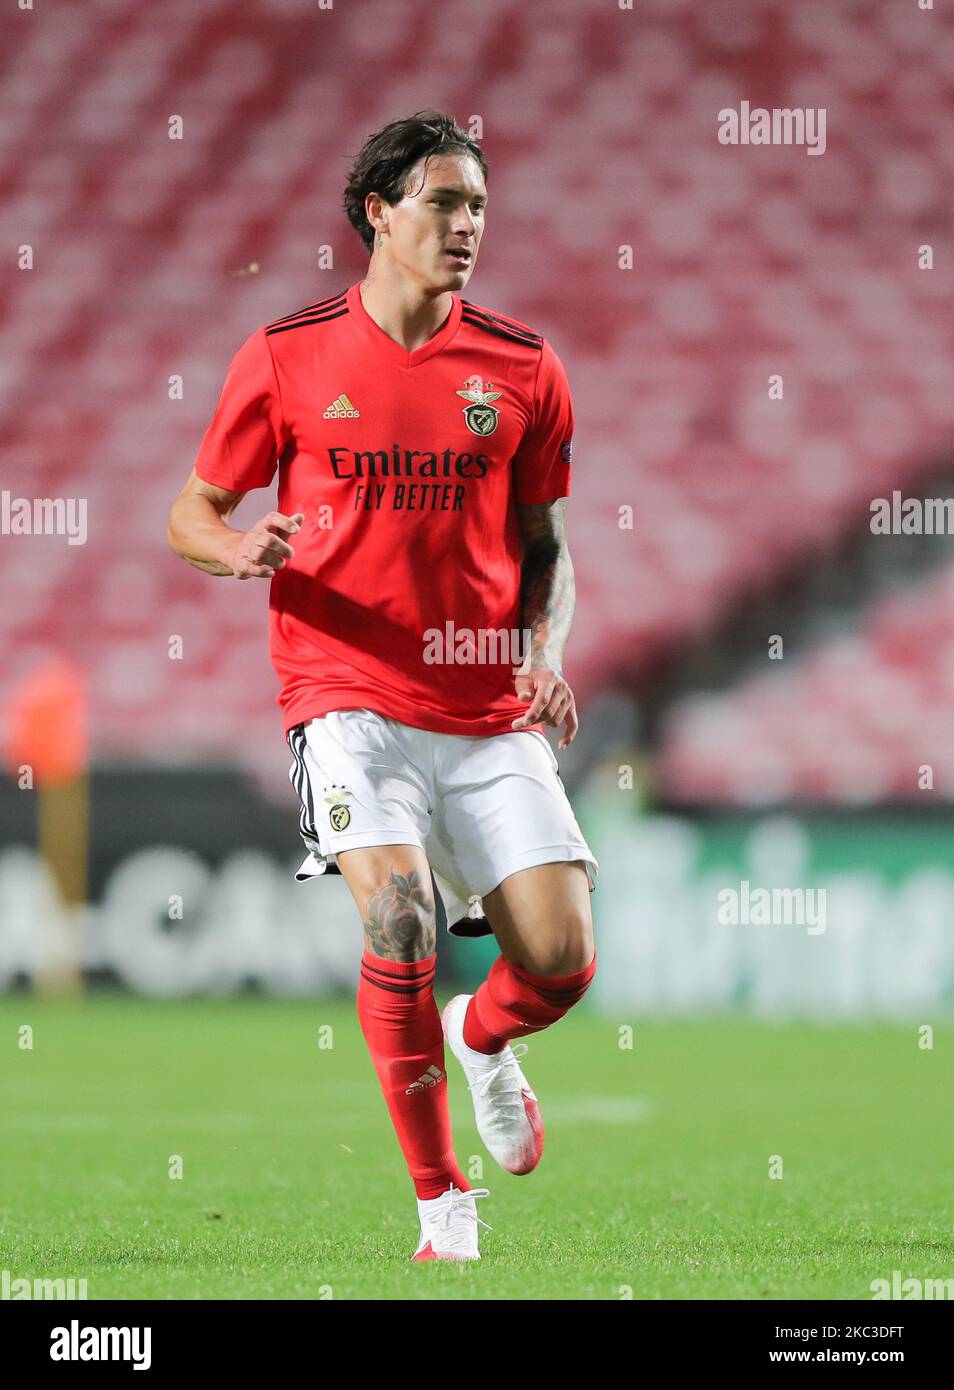 LISBON, PORTUGAL - NOVEMBER 5:Darwin Nunez Luis of SL Benfica in action during the UEFA Europa League Group D stage match between SL Benfica and Rangers FC at Estadio da Luz on November 5, 2020 in Lisbon, Portugal. (Photo by Paulo Nascimento/NurPhoto) Stock Photo